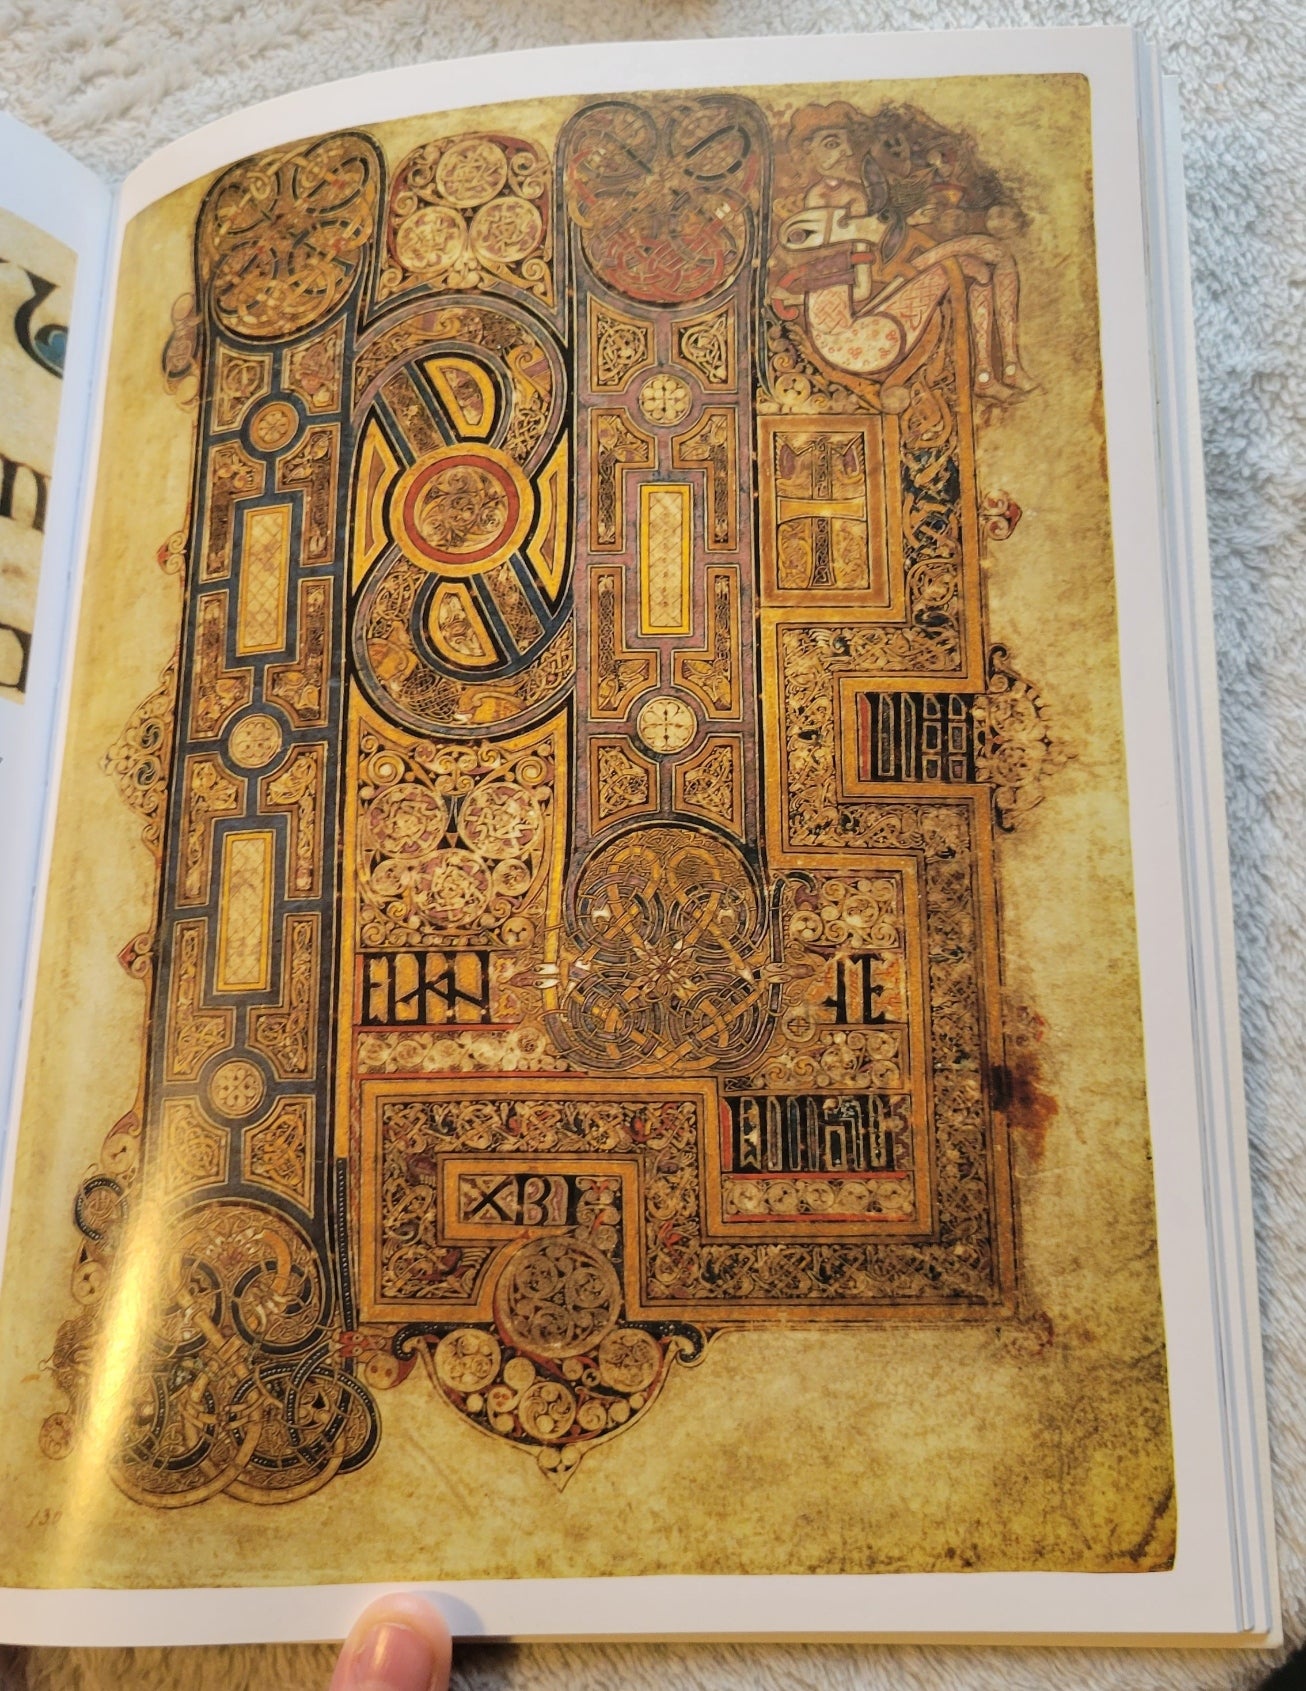  Used book for sale "The Book of Kells: An Illustrated Introduction to the Manuscript in Trinity College Dublin" by Bernard Meehan, published by Thames & Hudson, Ltd, copyright 1994, reprint in 2013. Illustration